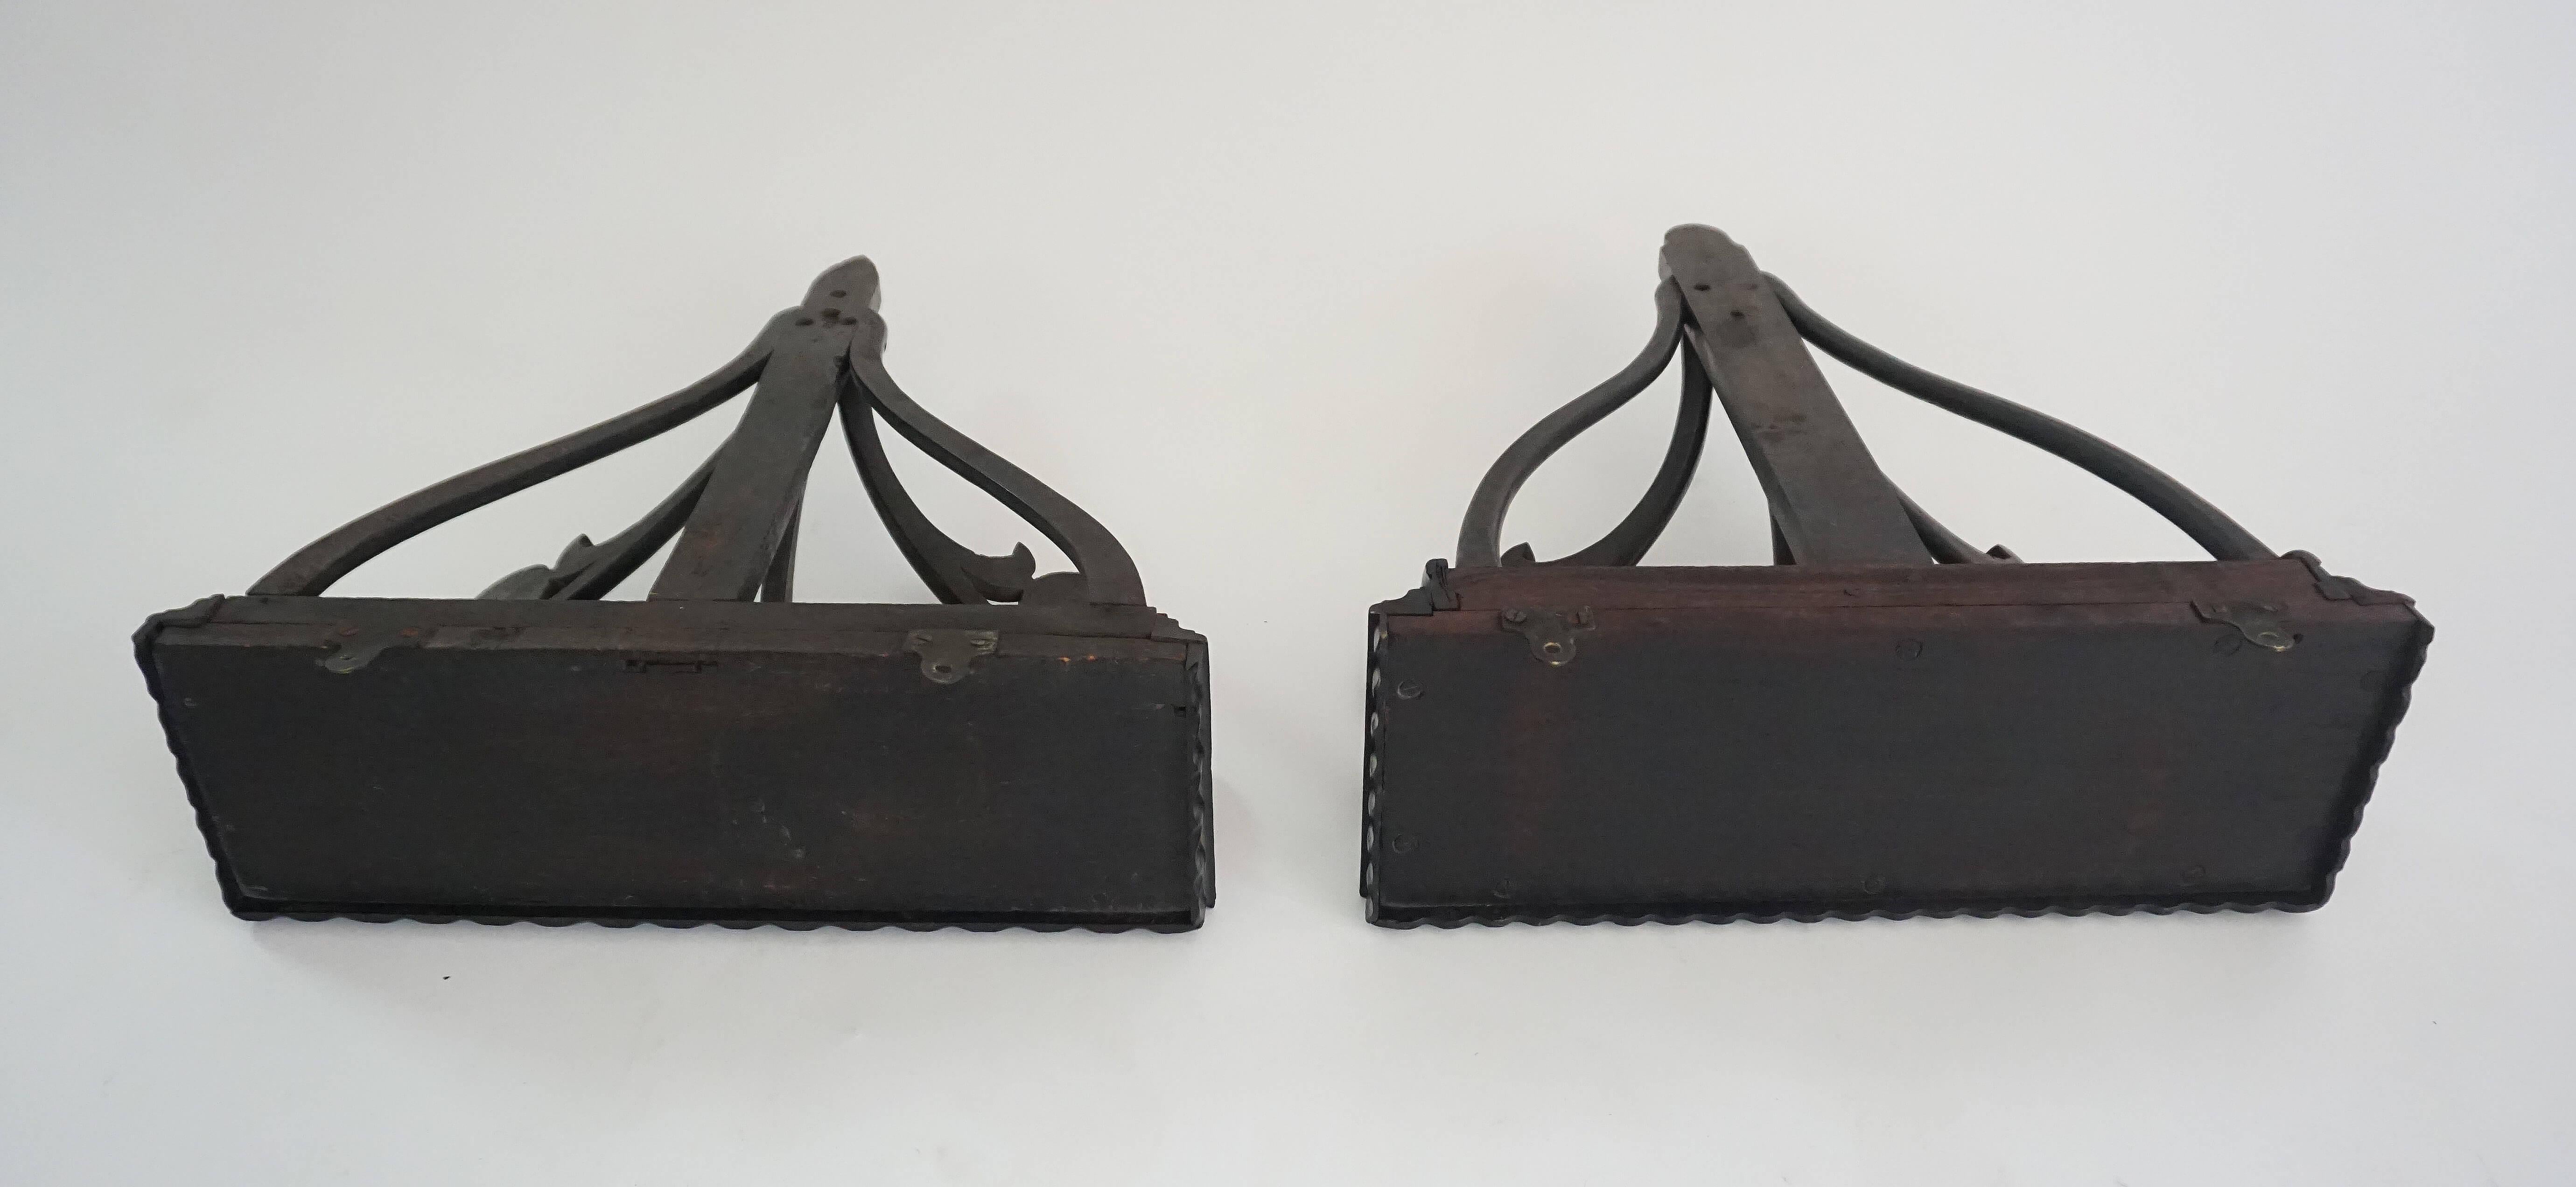 Pair of Anglo-Ceylonese Carved Ebony Wall Brackets or Shelves, circa 1840 For Sale 4